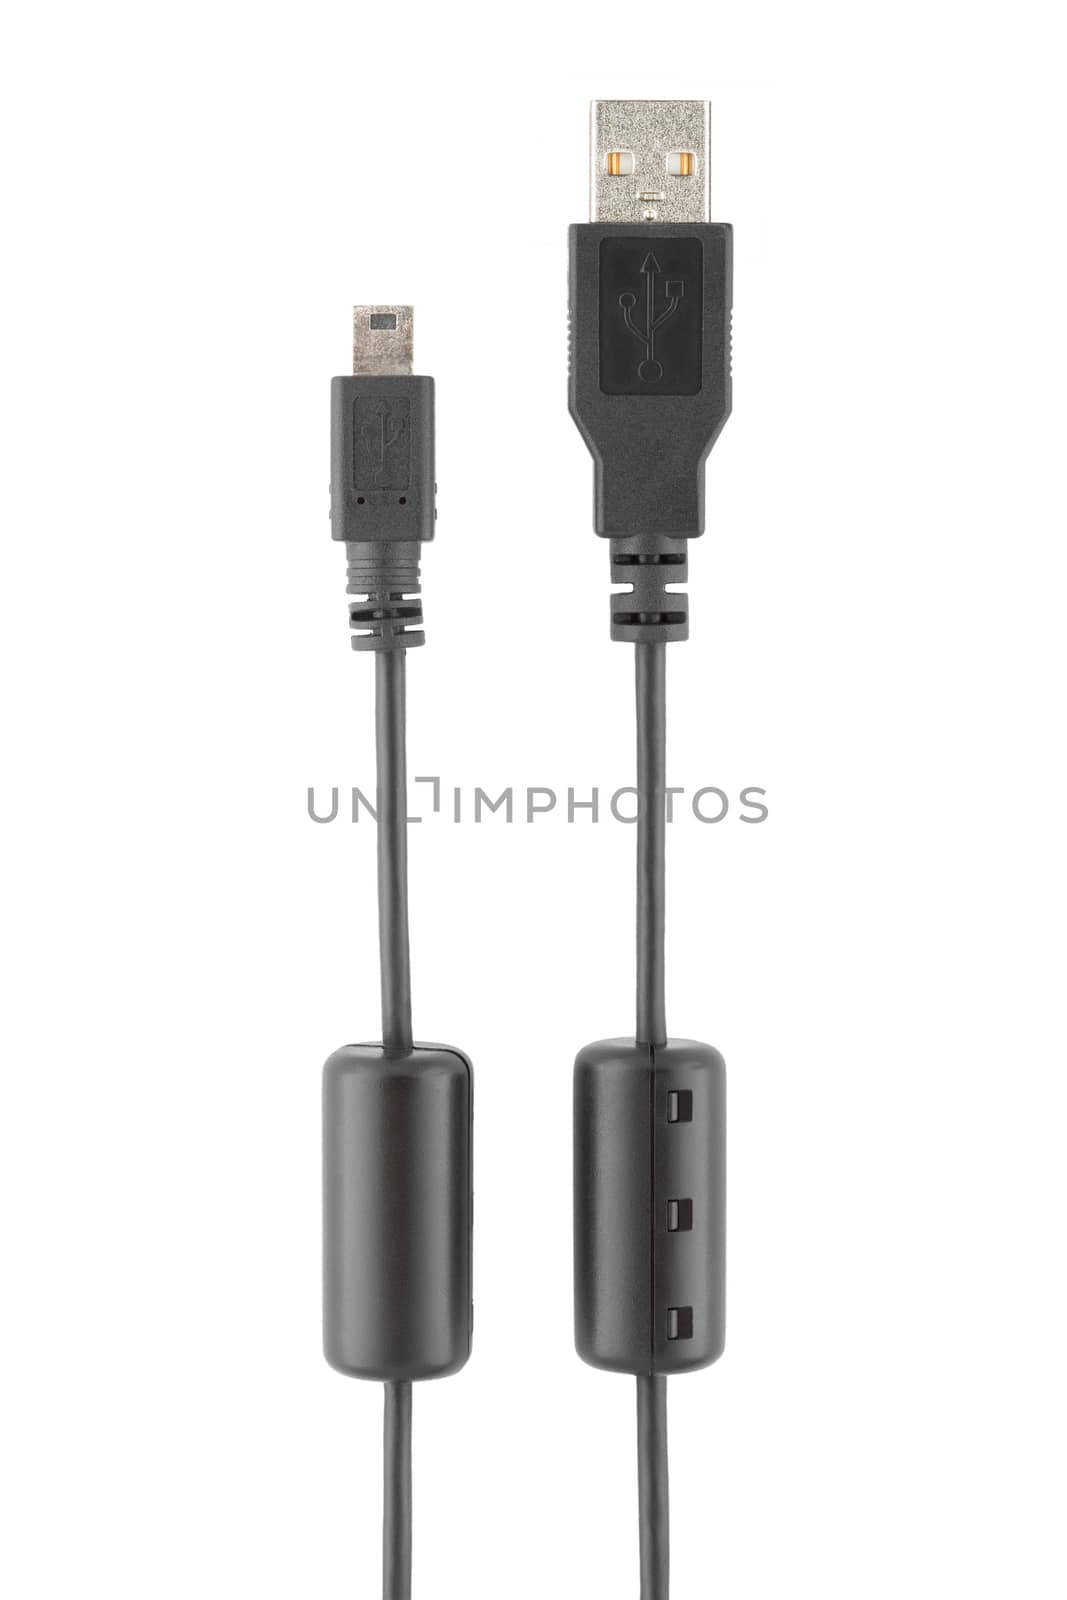 Mini USB cable isolated on white background, clipping path